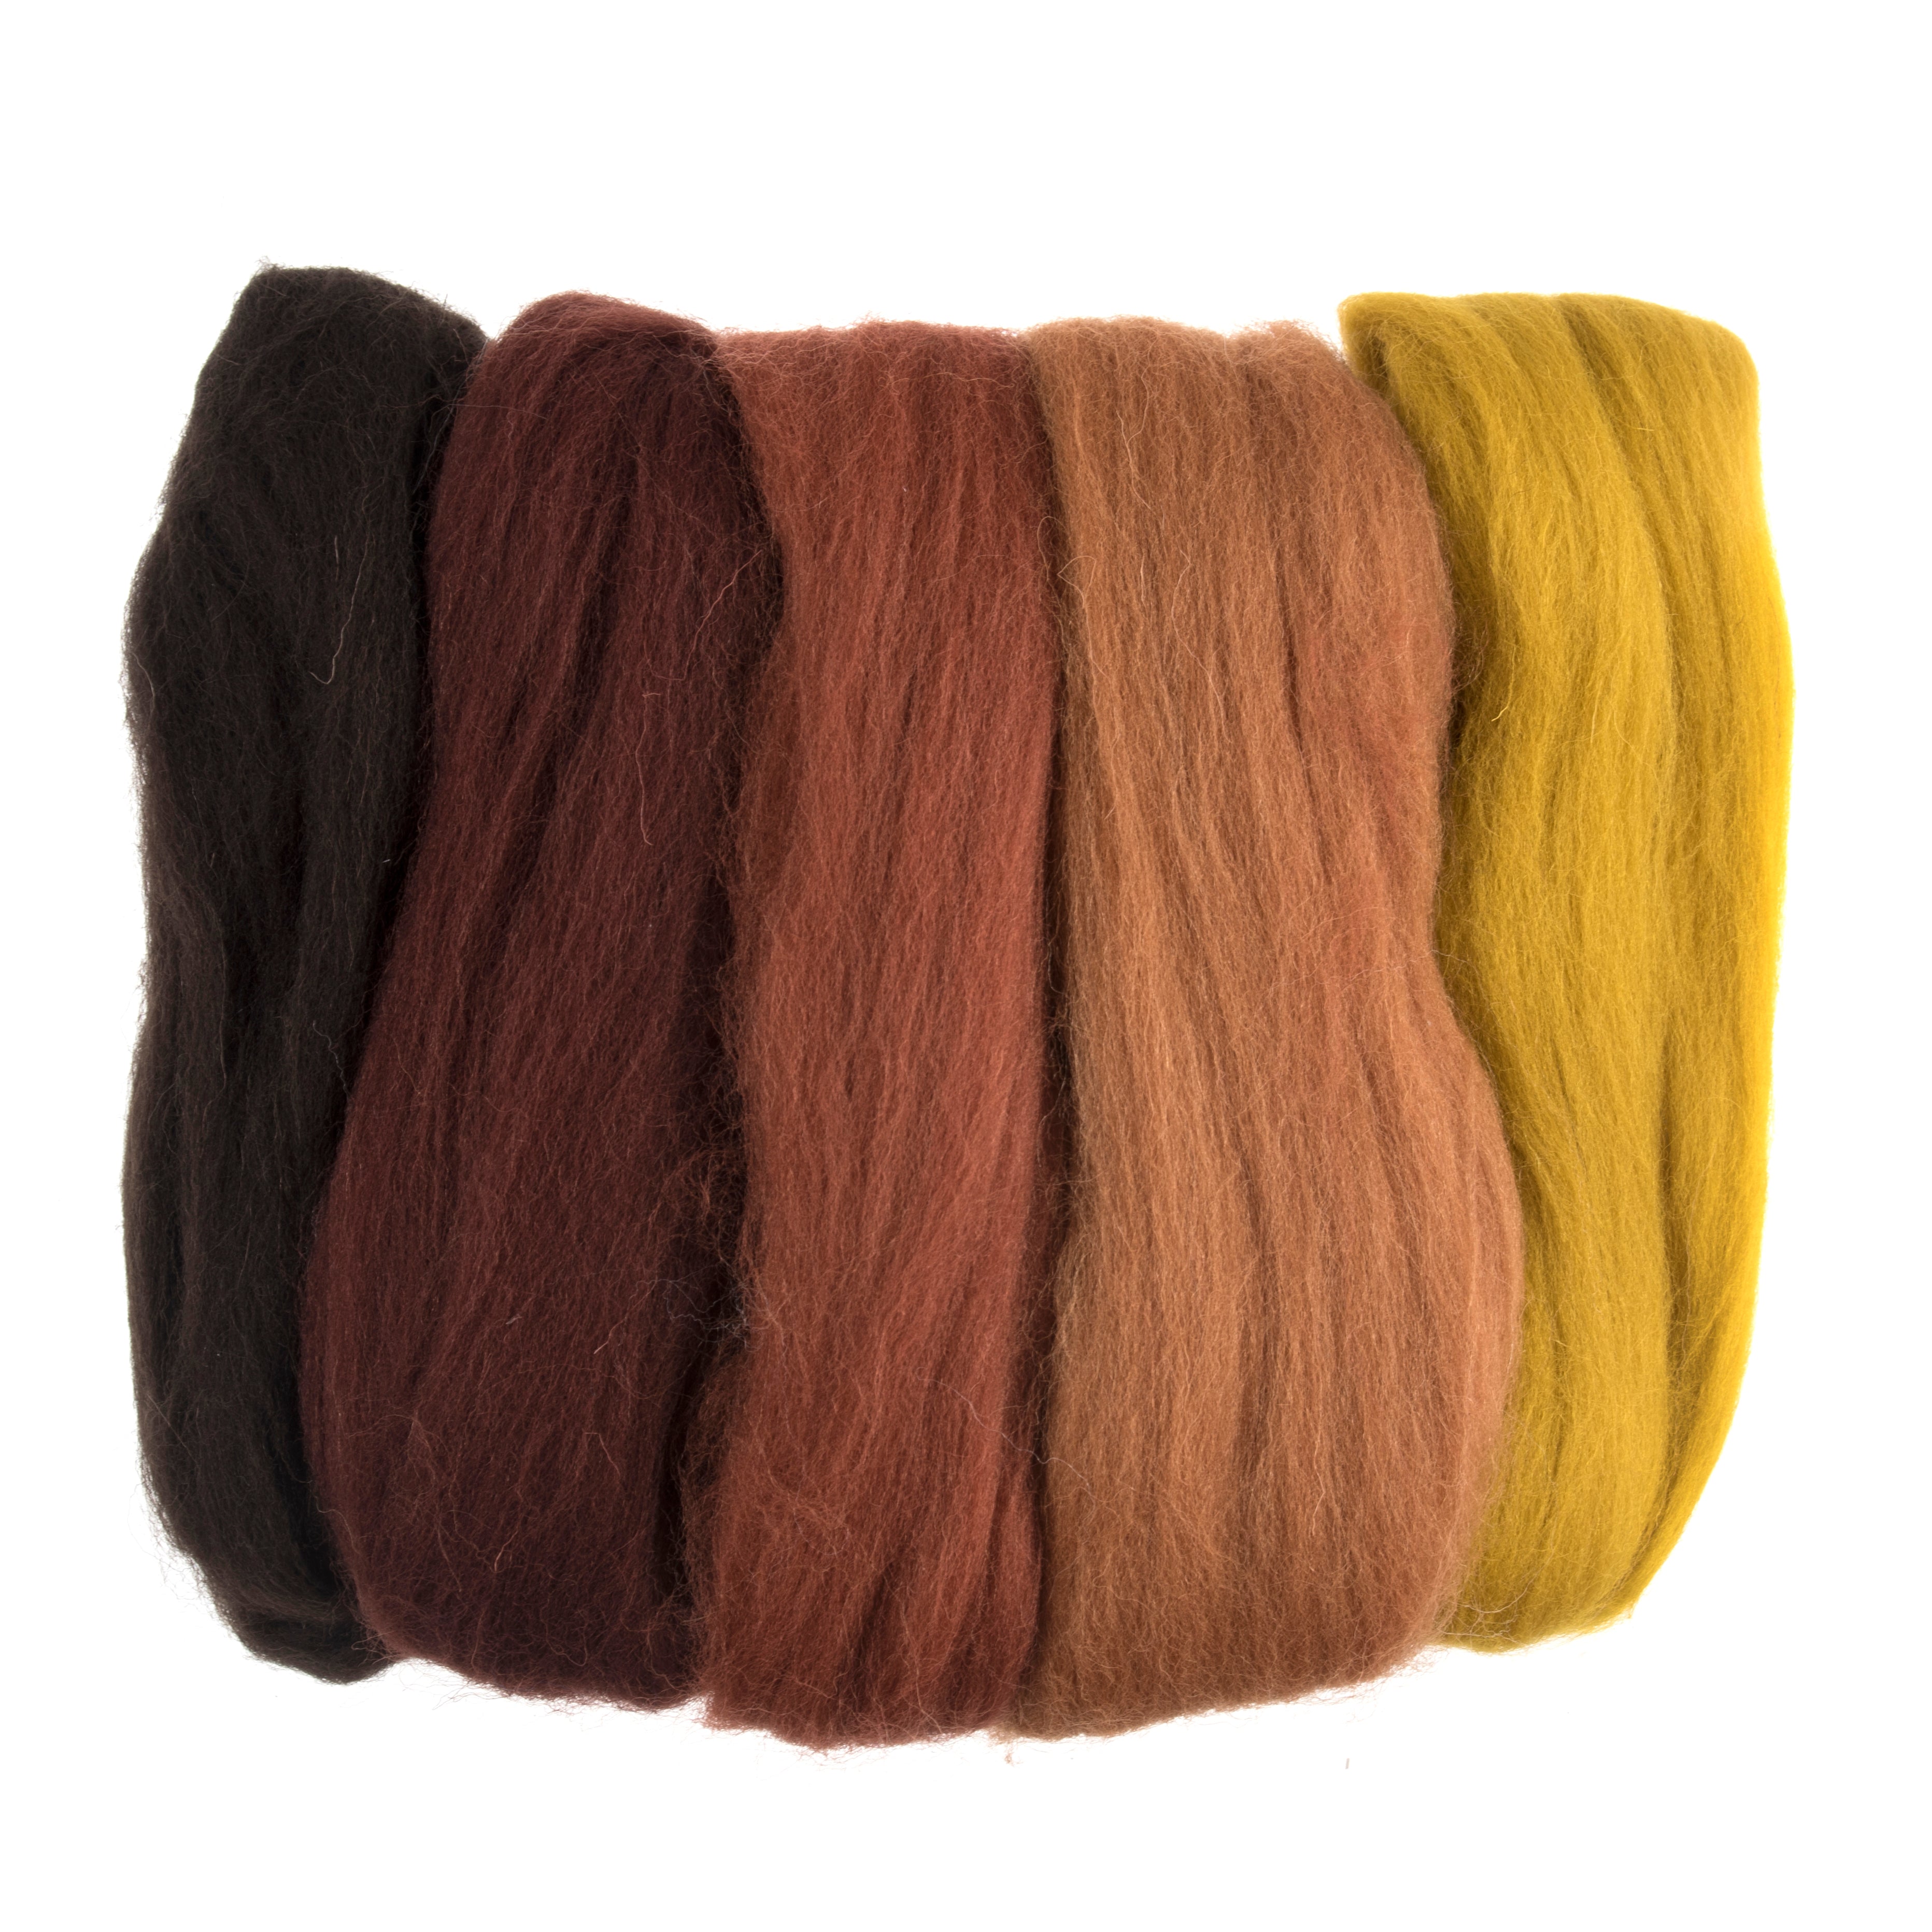 Natural Wool Roving: 50g: Assorted Autumn